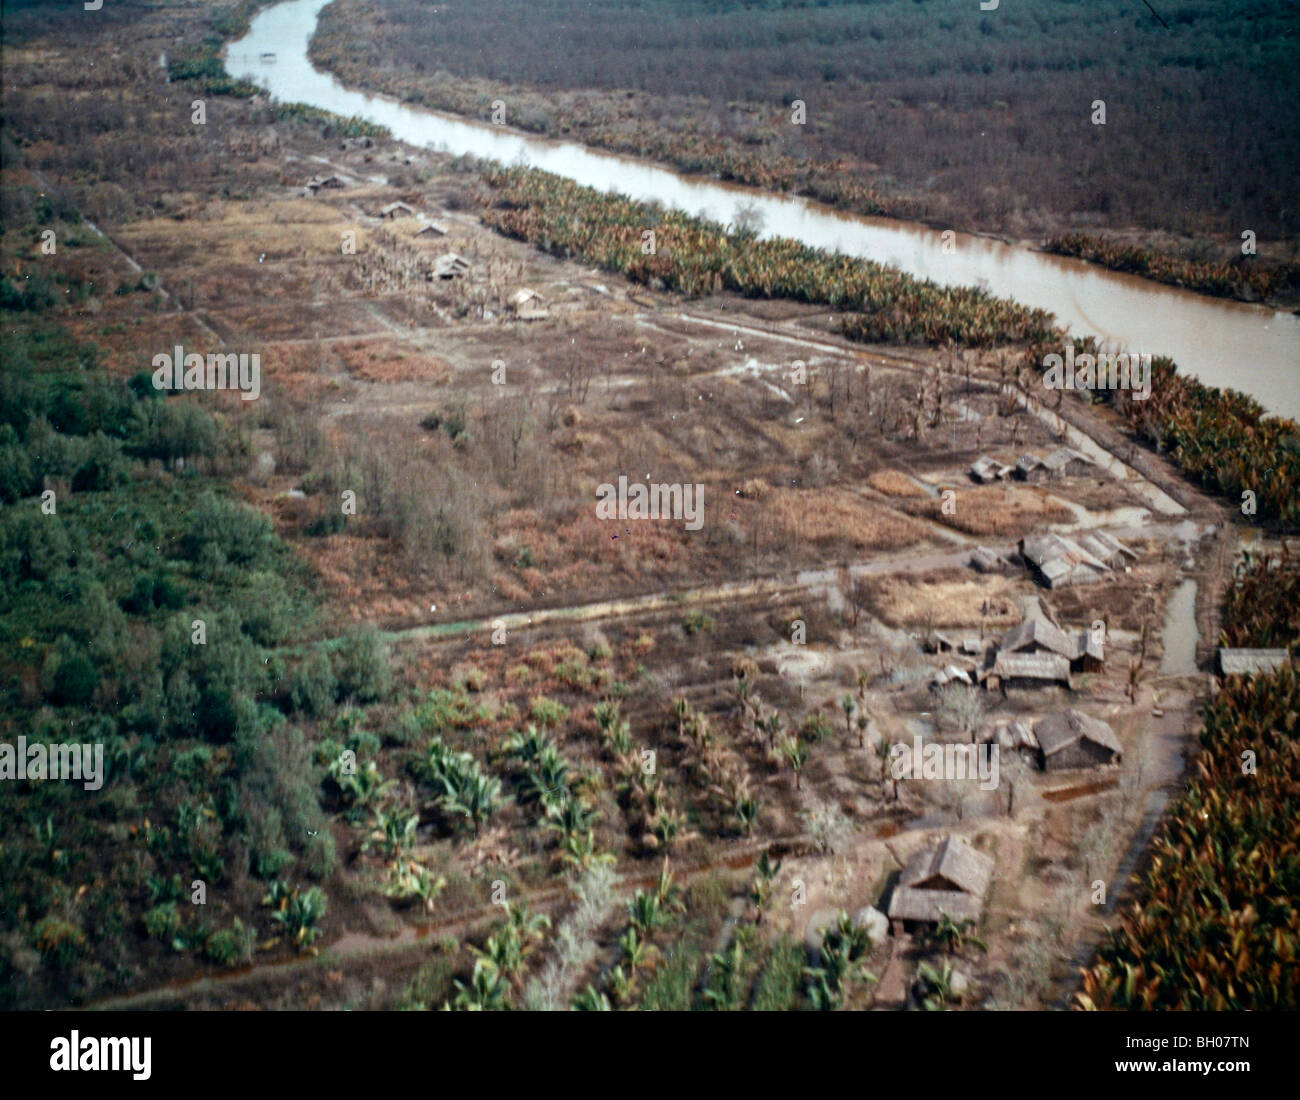 Photo Depicts Deterioration Of Vegetation Likely Caused By Agent Orange Or A Similar Defoliant Used During The Vietnam War Stock Photo Alamy